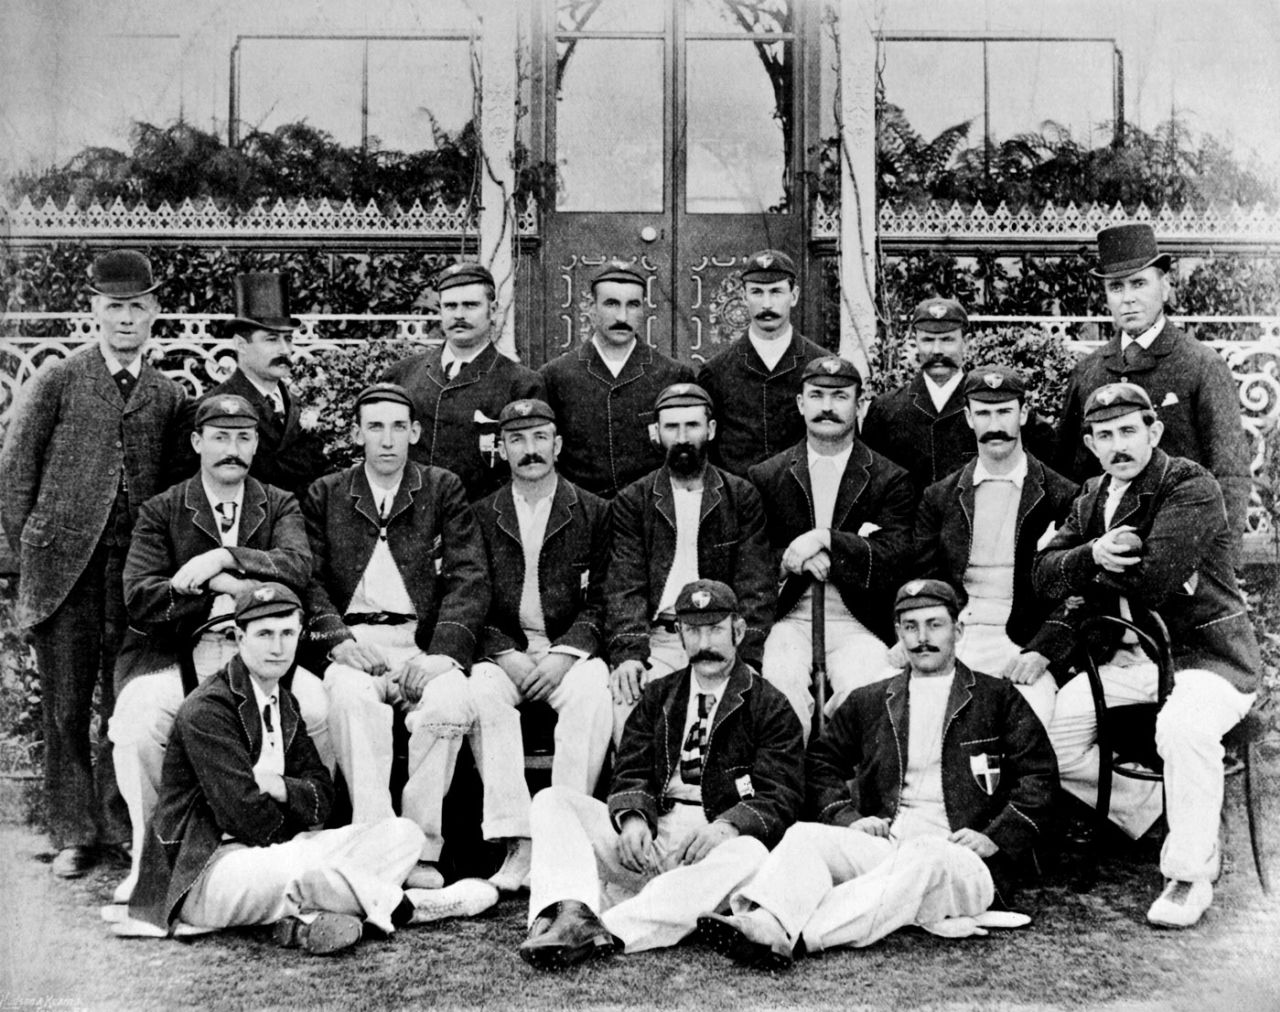 The Australian team in England, 1893. Back row (left to right): Carpenter (umpire), V Cohen (manager), Affie Jarvis, Walter Giffen, William Bruce, Alec Bannerman and umpire Thoms. Middle row: Harry Trott, Hugh Trumble, George Giffen, Jack Blackham (captain), JJ Lyons, Bob McLeod and Charlie Turner. Front row: Harry Graham, Arthur Coningham and Syd Gregory